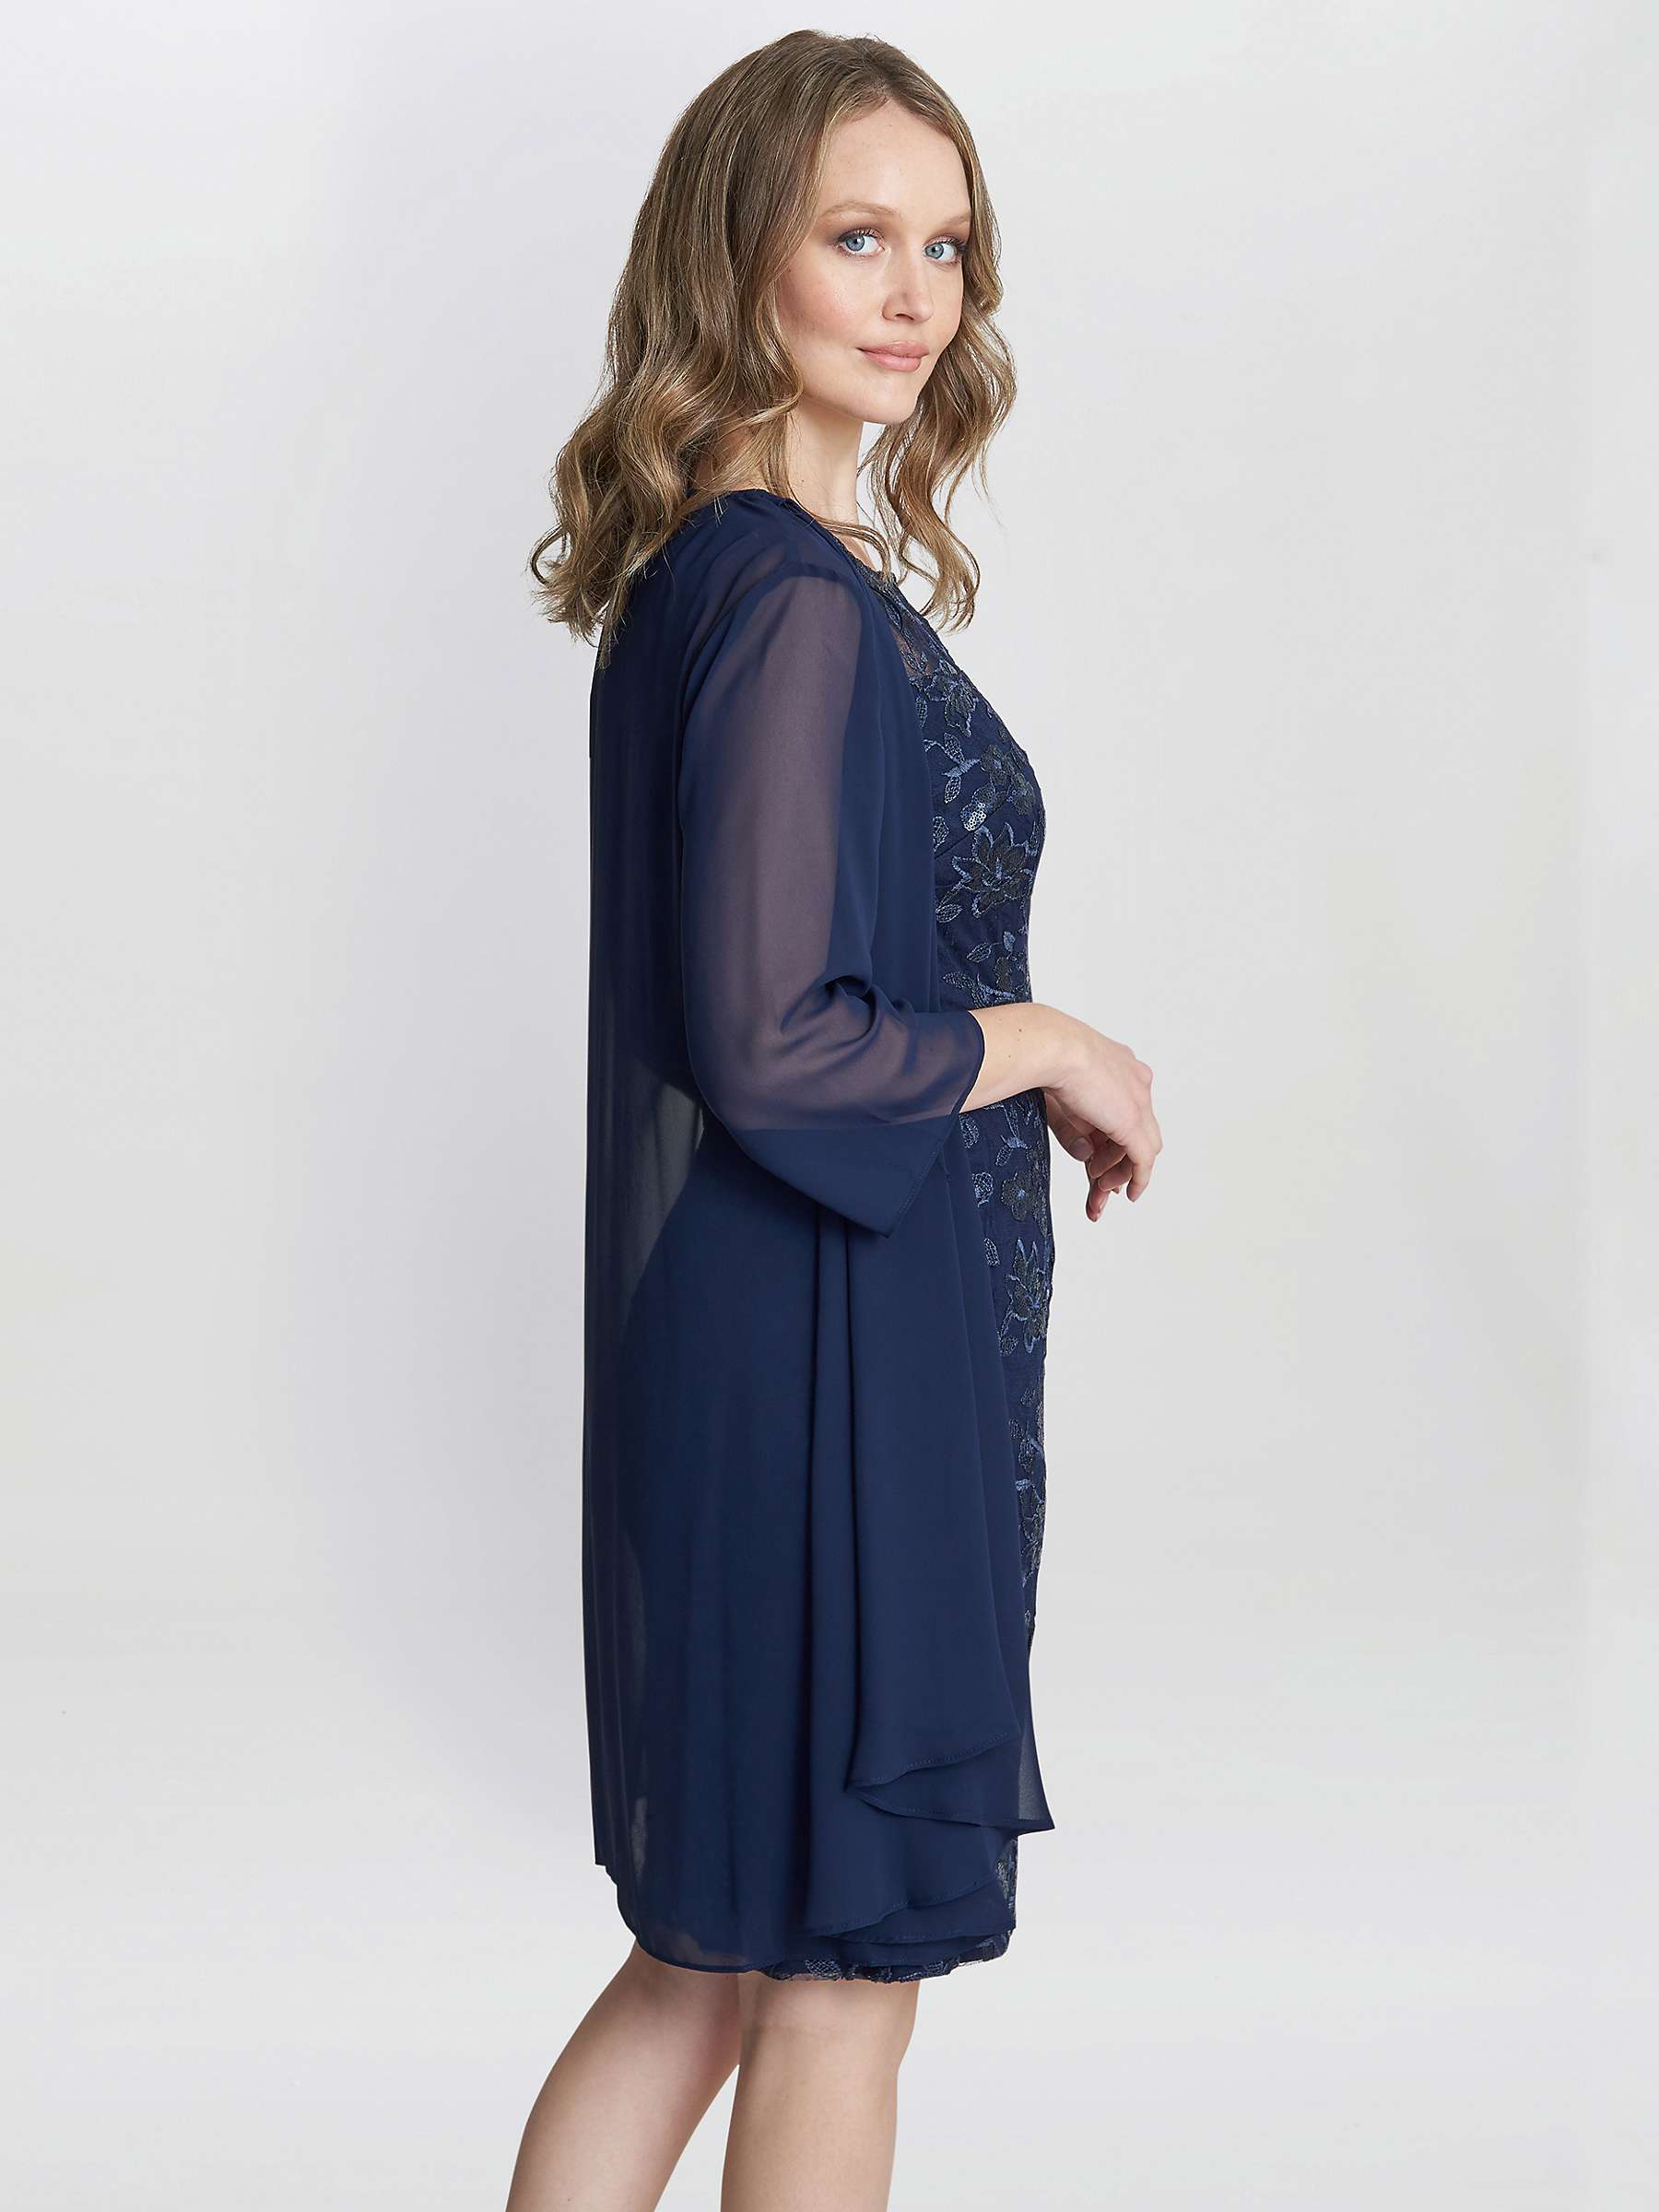 Buy Gina Bacconi Hayley Embroidered Dress with Chiffon Jacket, Spring Navy Online at johnlewis.com